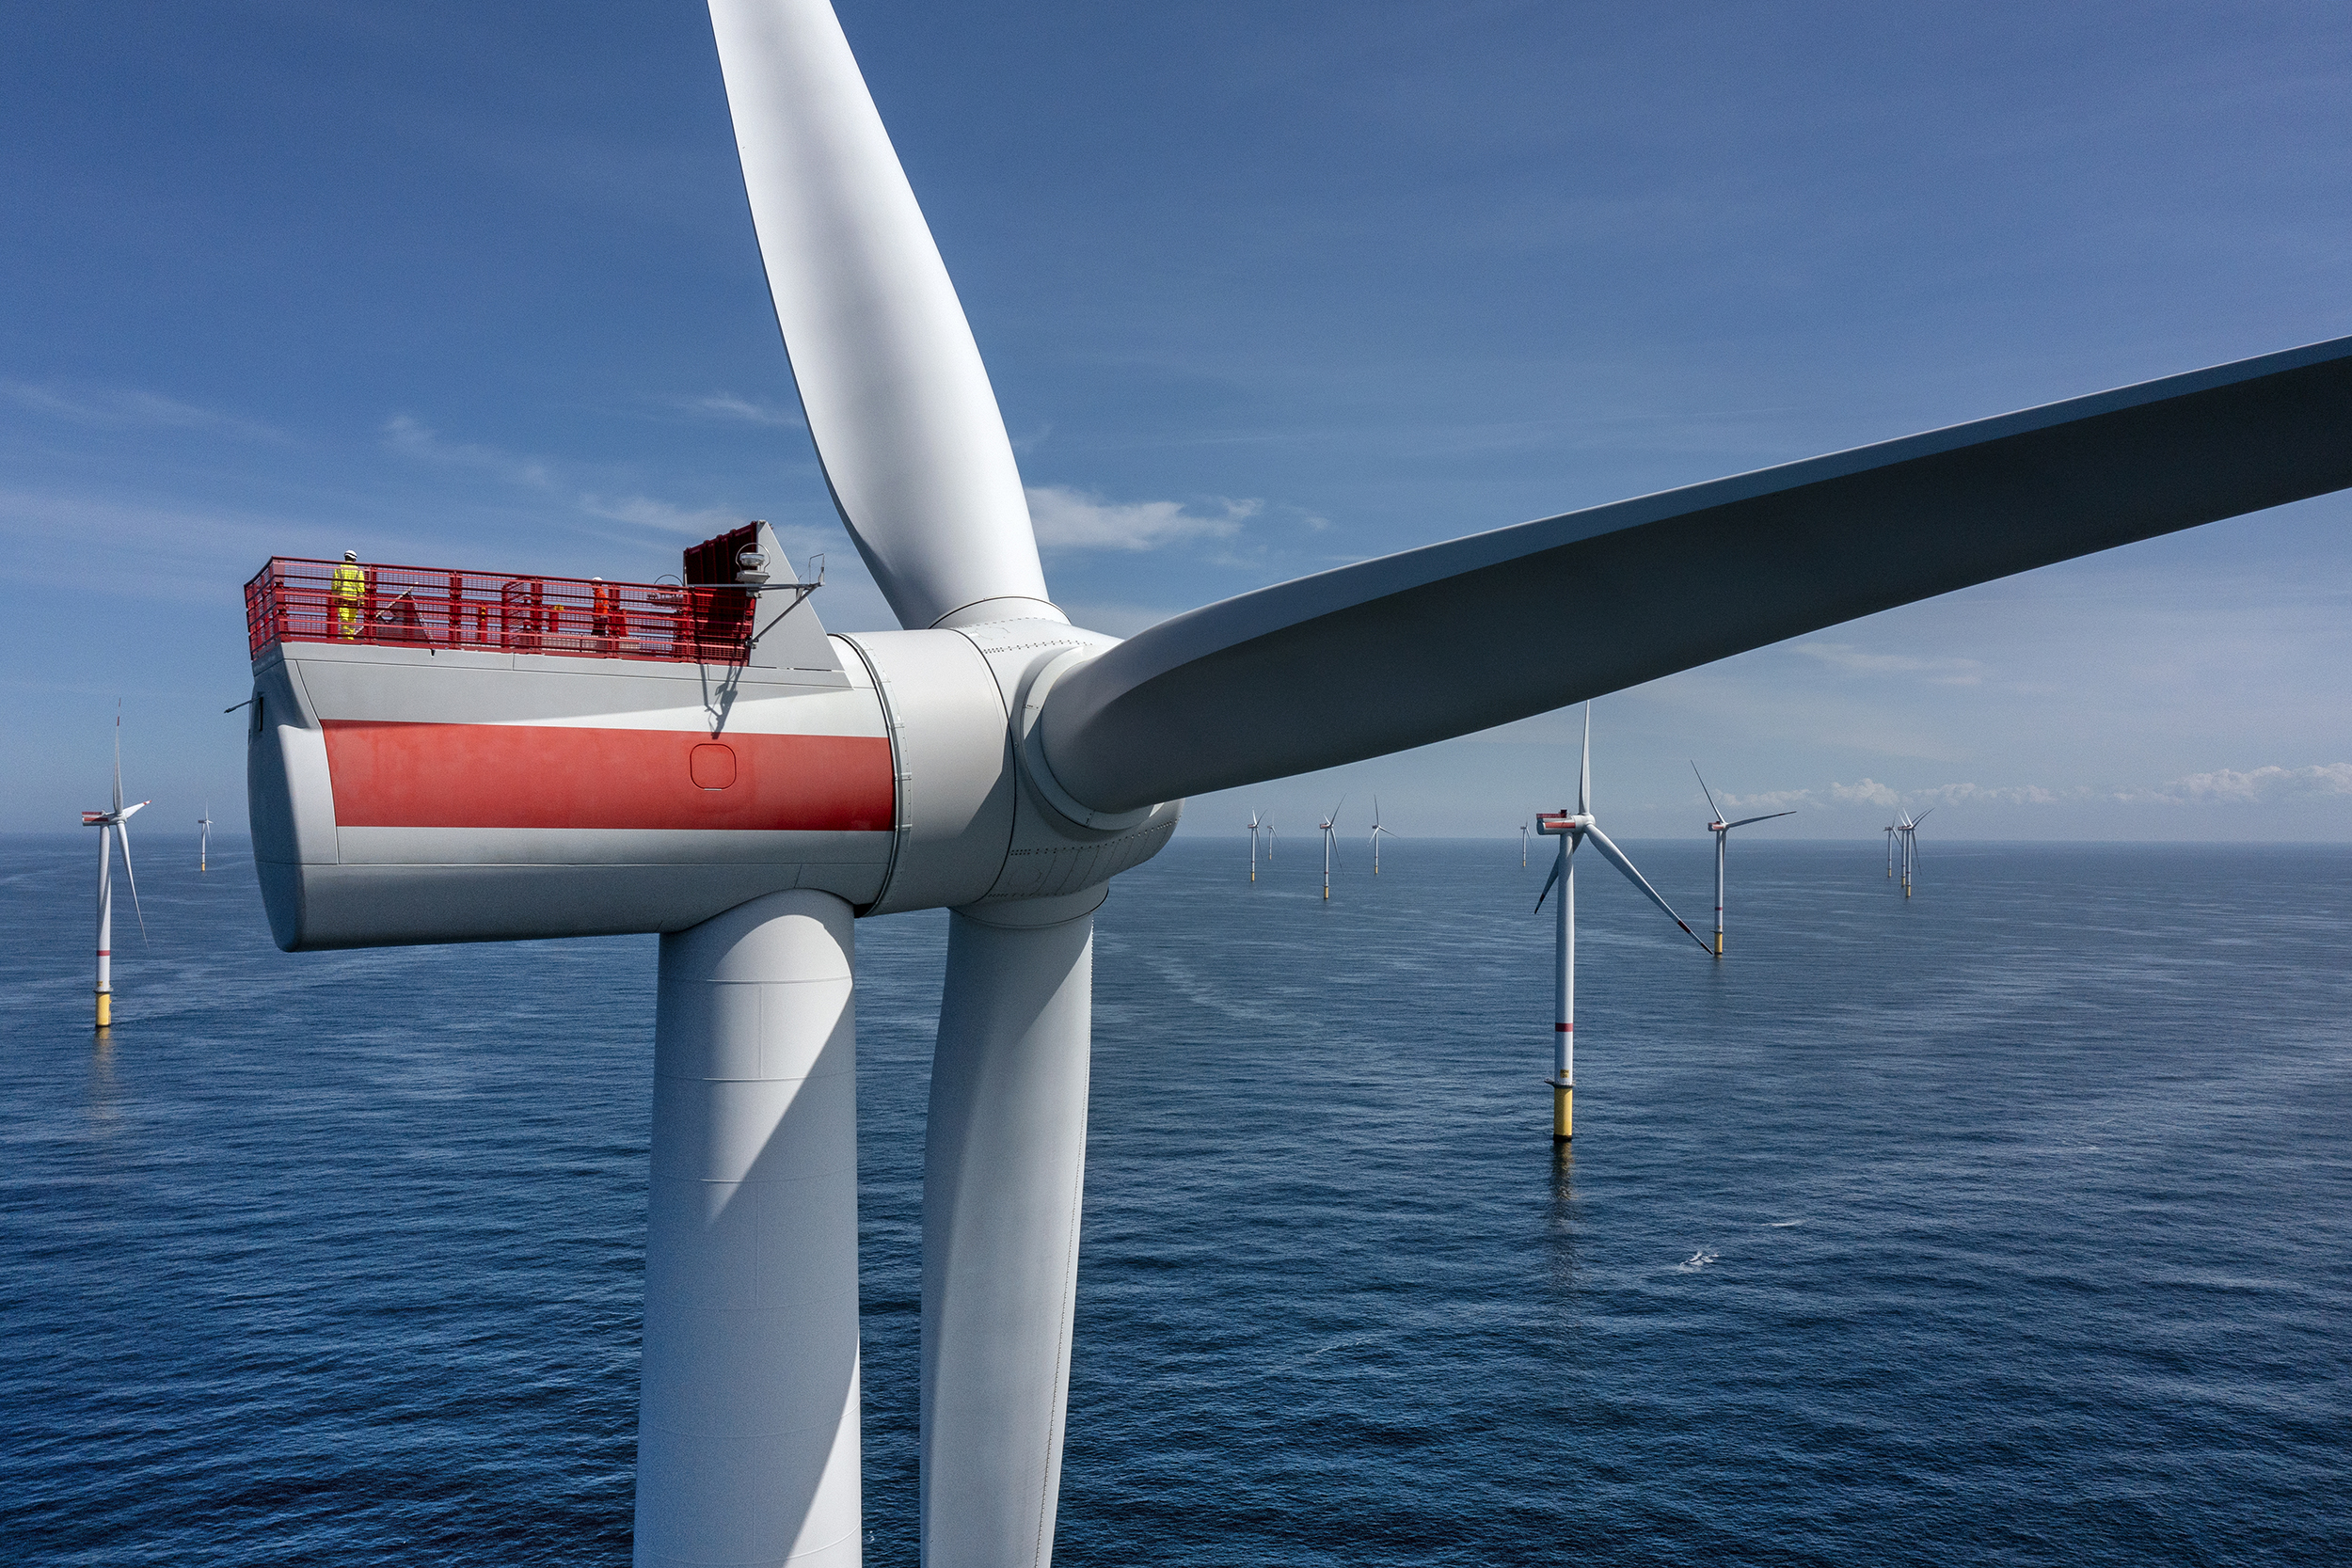 The future of wind energy in the US is floating turbines as tall